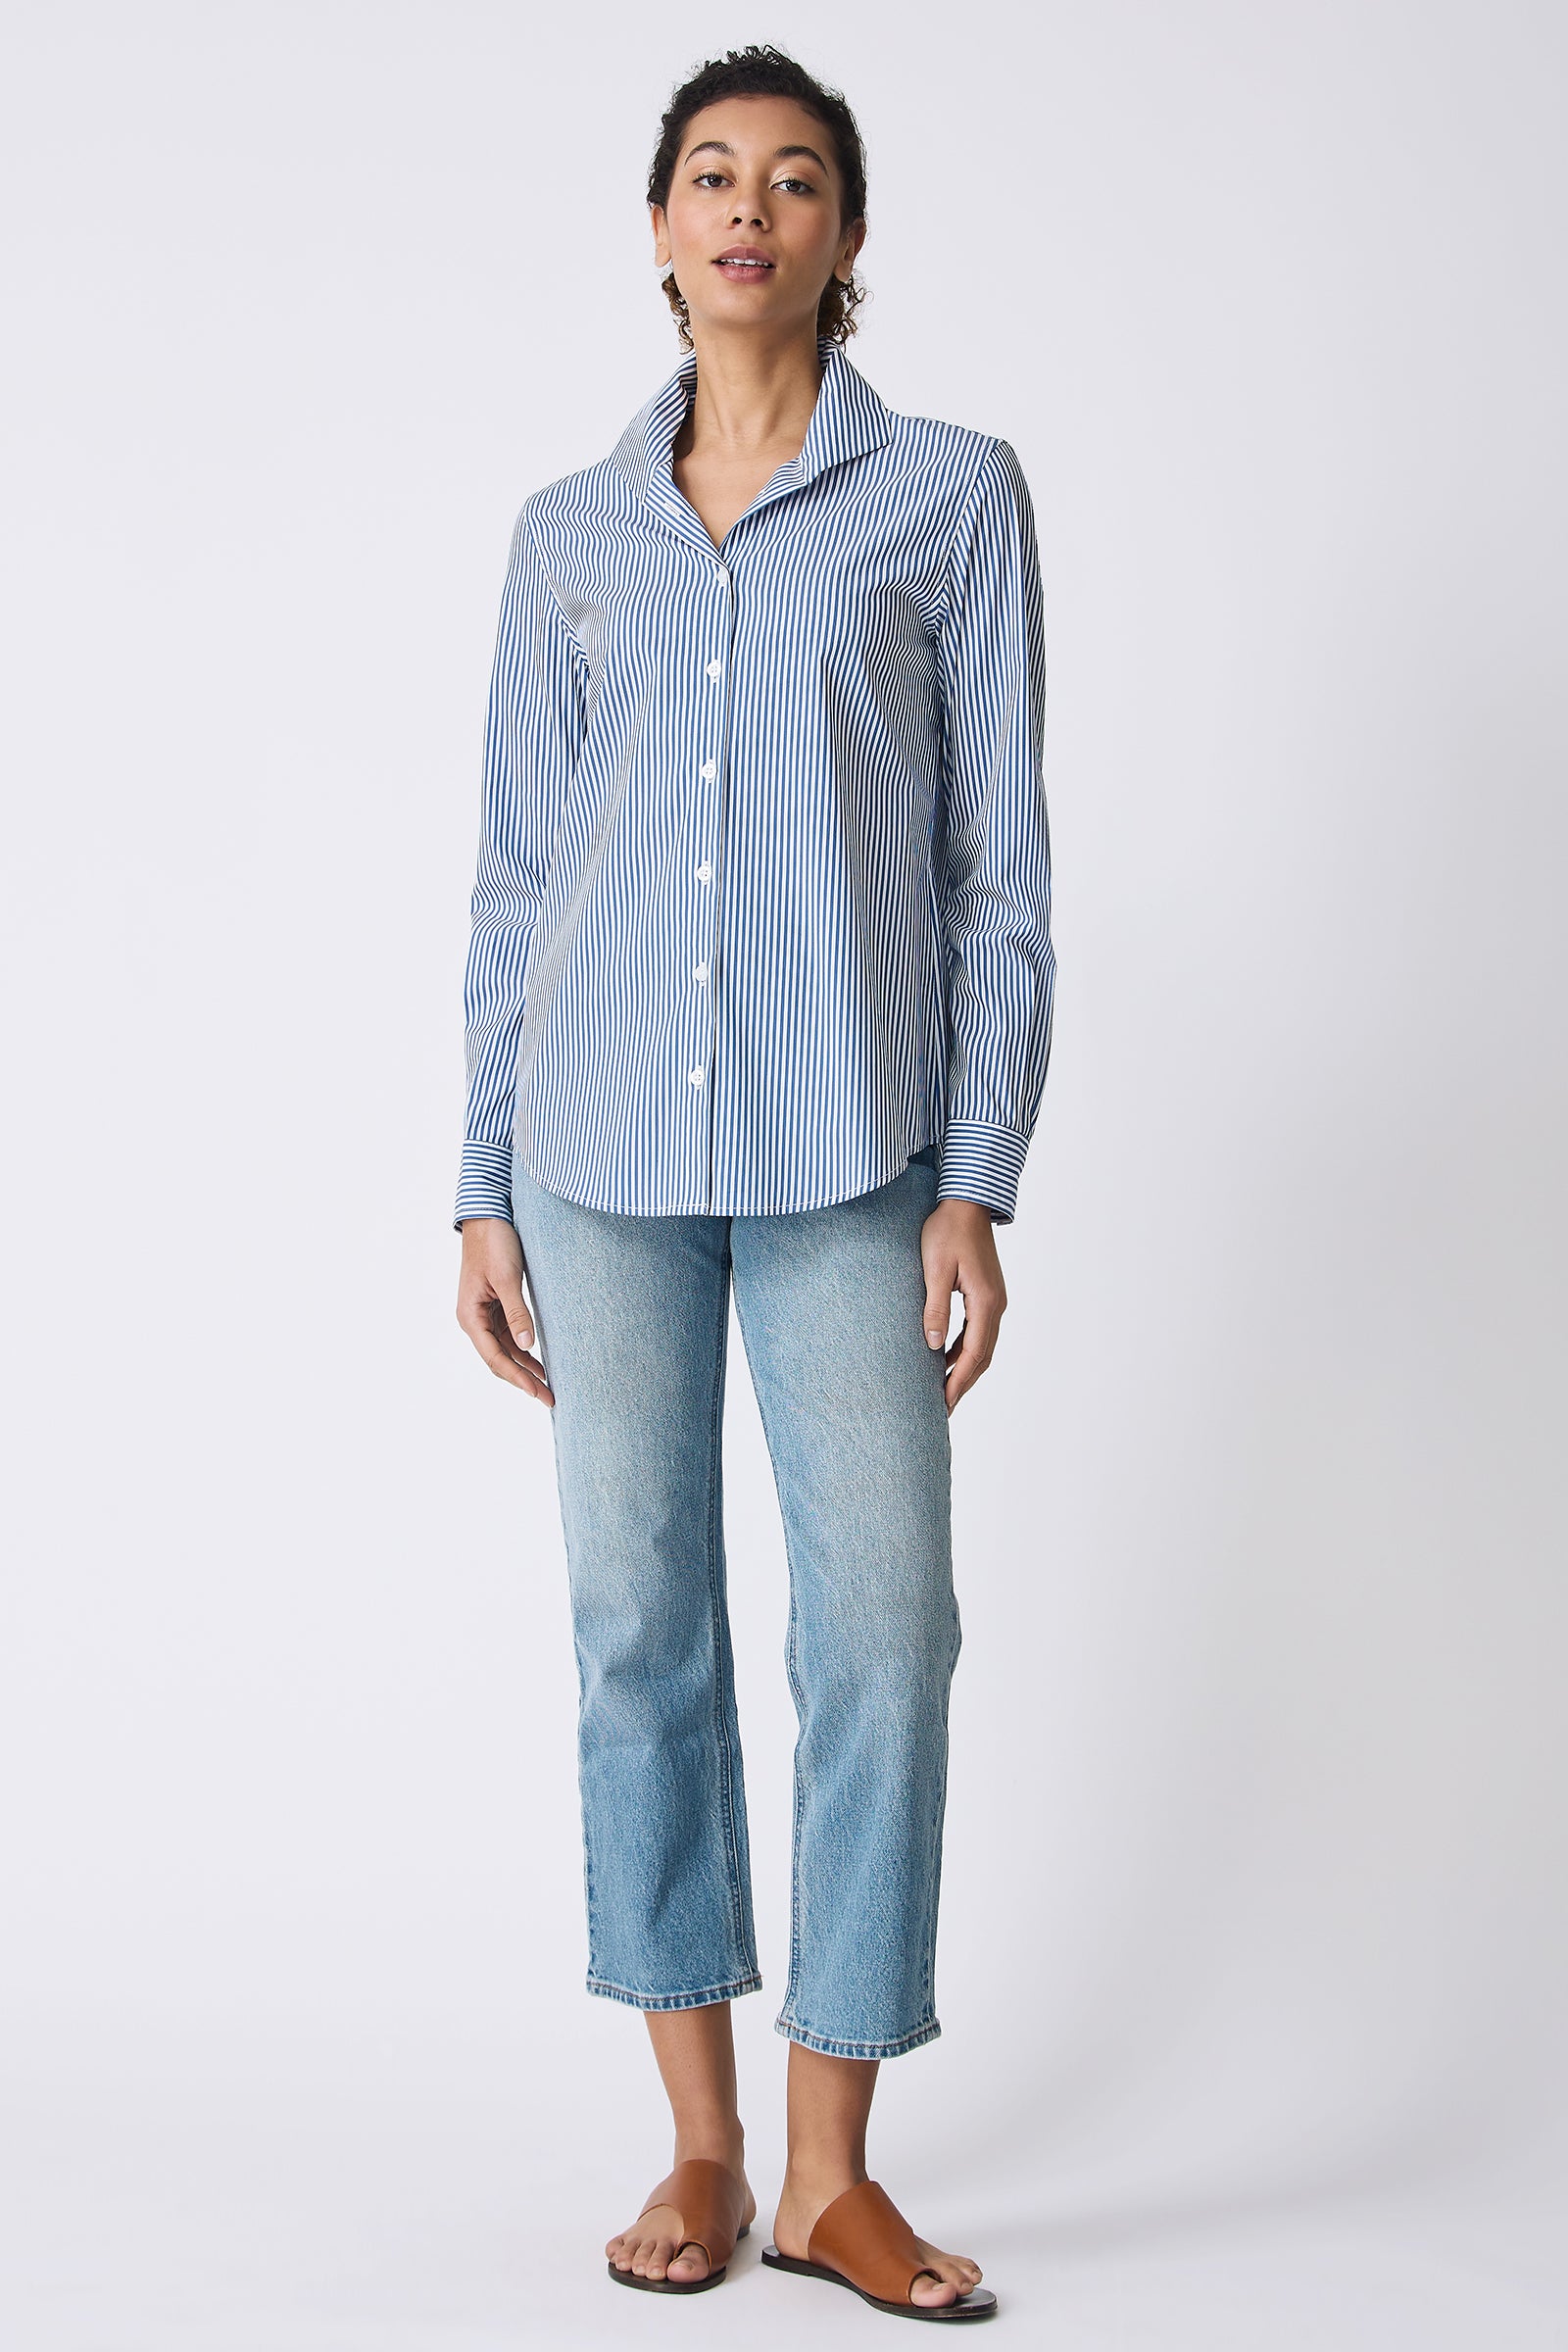 Kal Rieman image of the Ginna Box Pleat Shirt in Miami Stripe Blue on model full front view